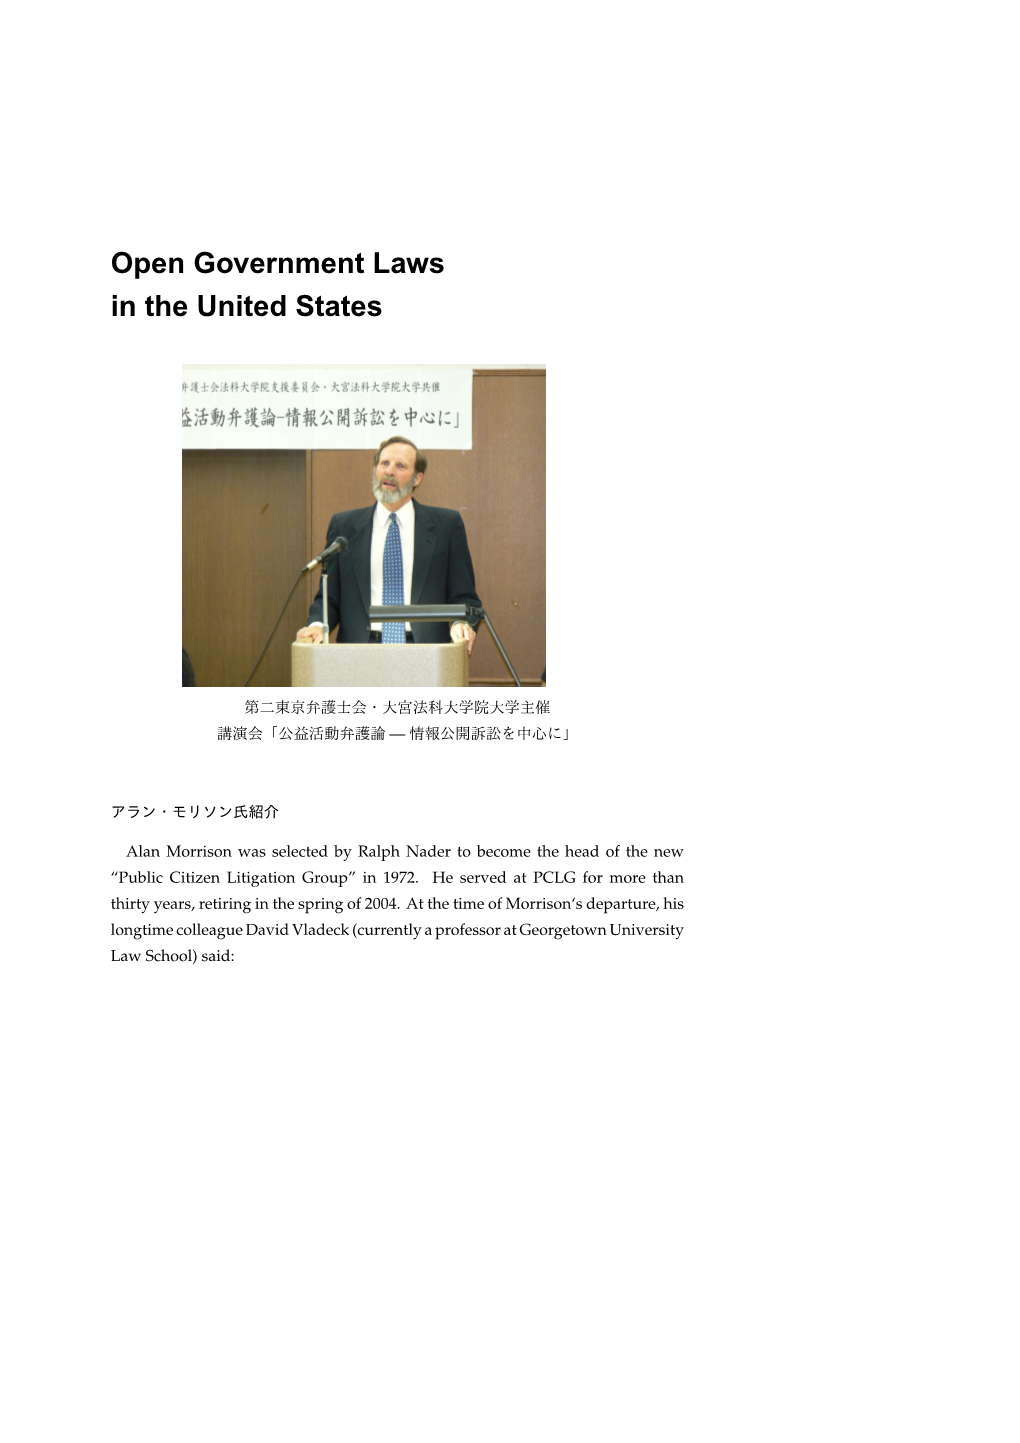 Open Government Laws in the United States